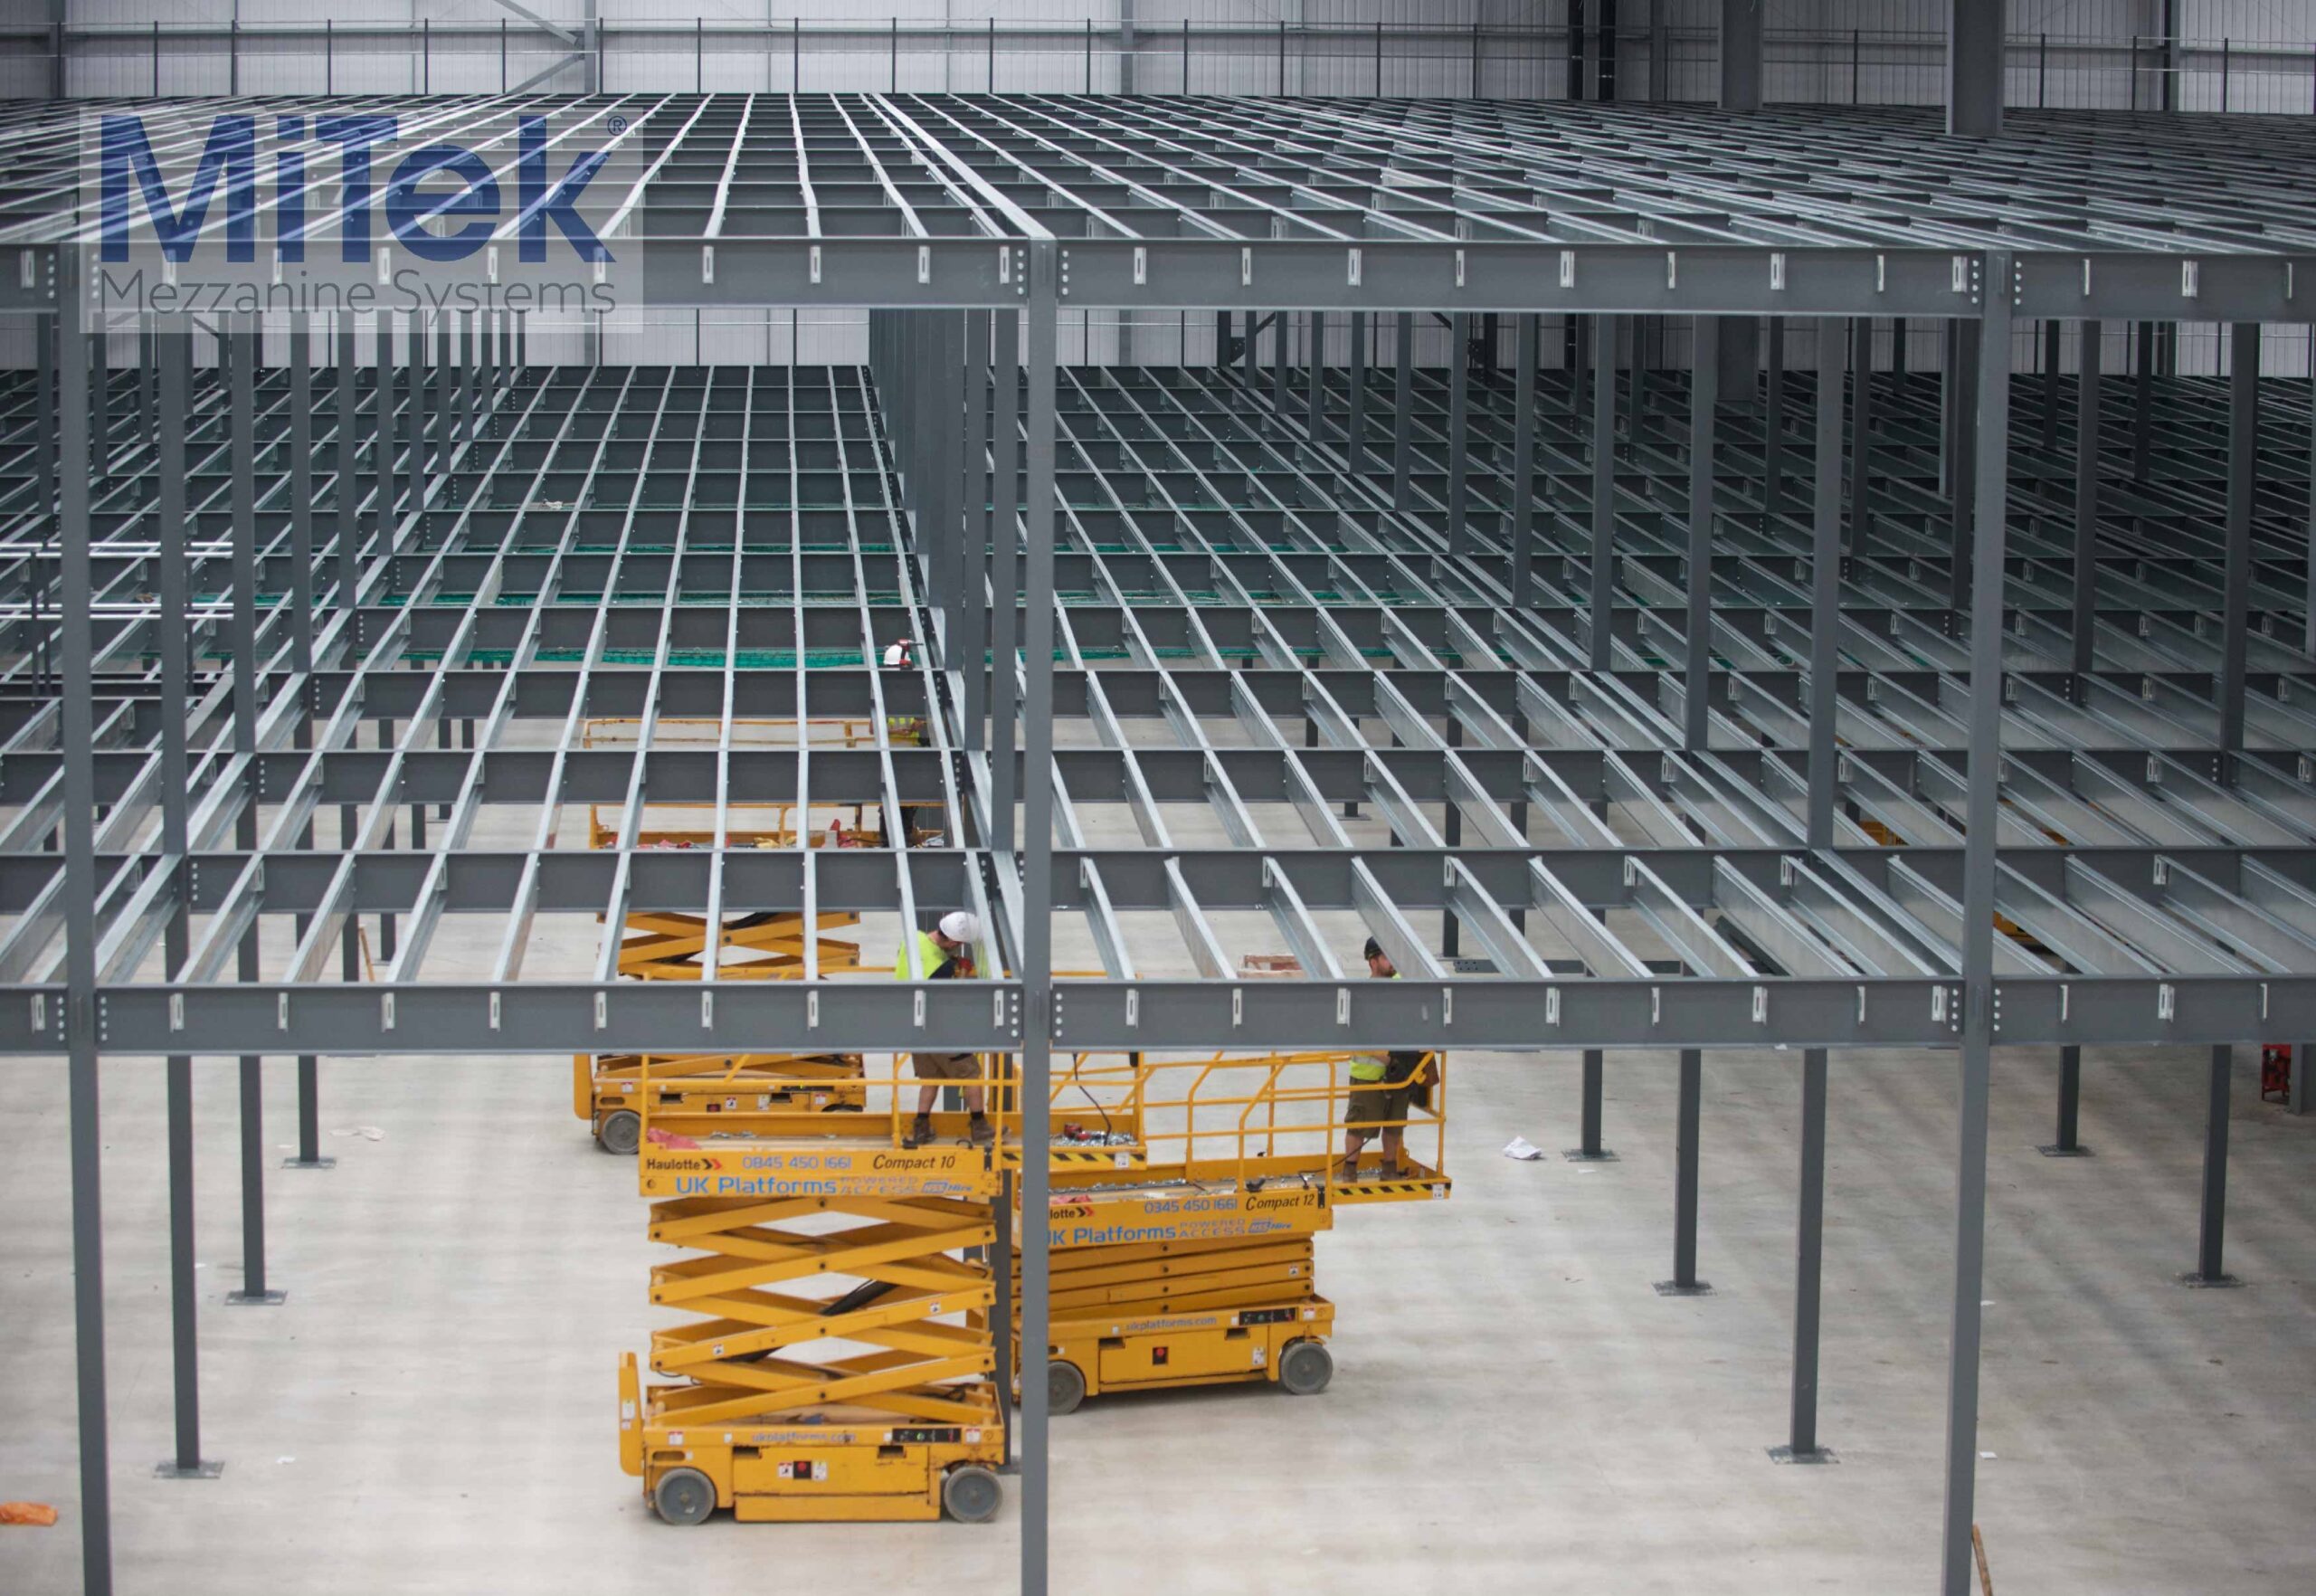 Trusted partners being recruited by MiTek Mezzanine Systems to meet European demand